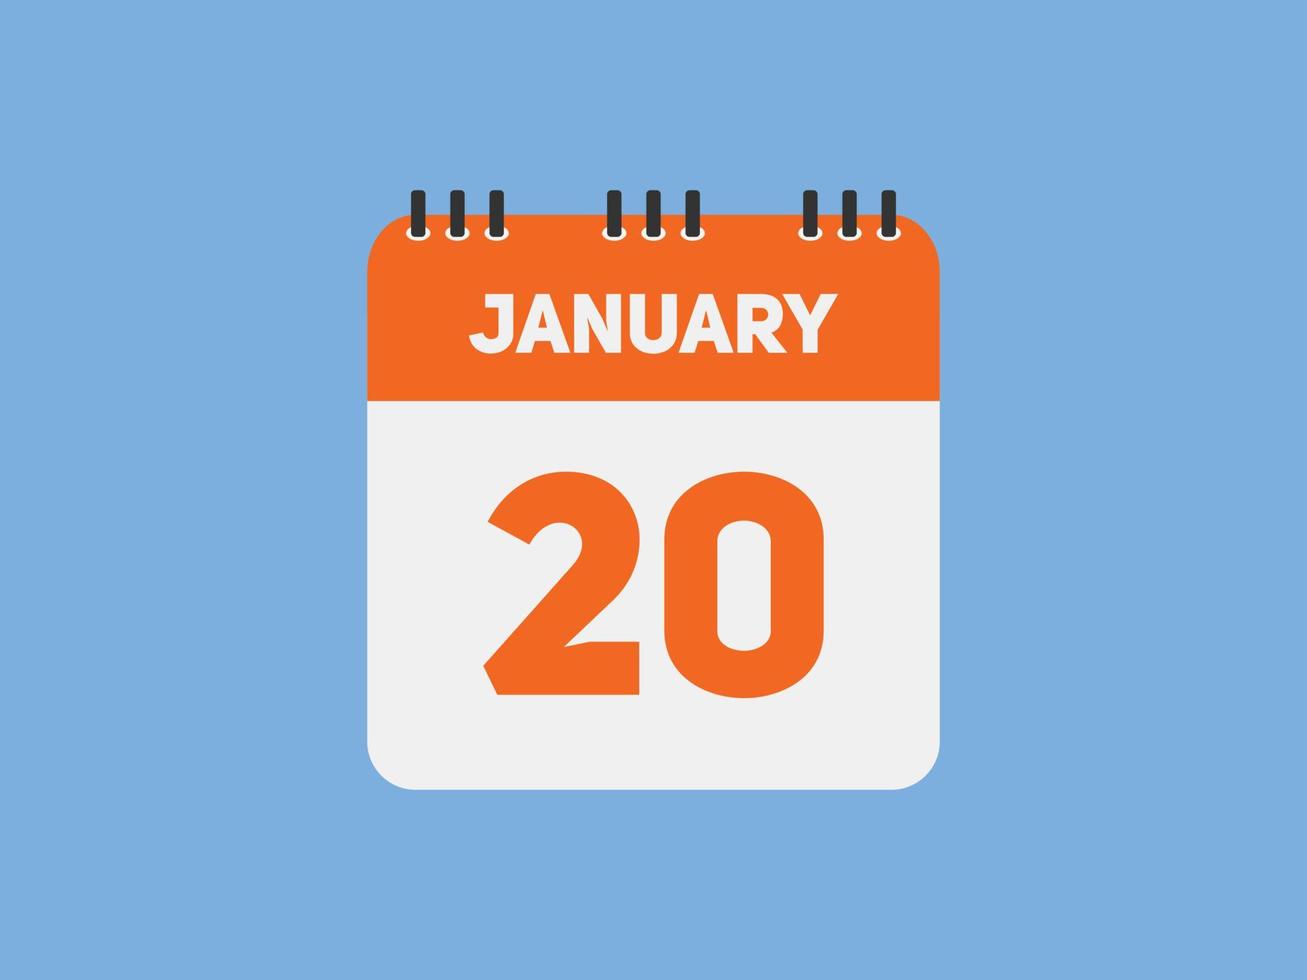 january 20 calendar reminder. 20th january daily calendar icon template. Calendar 20th january icon Design template. Vector illustration